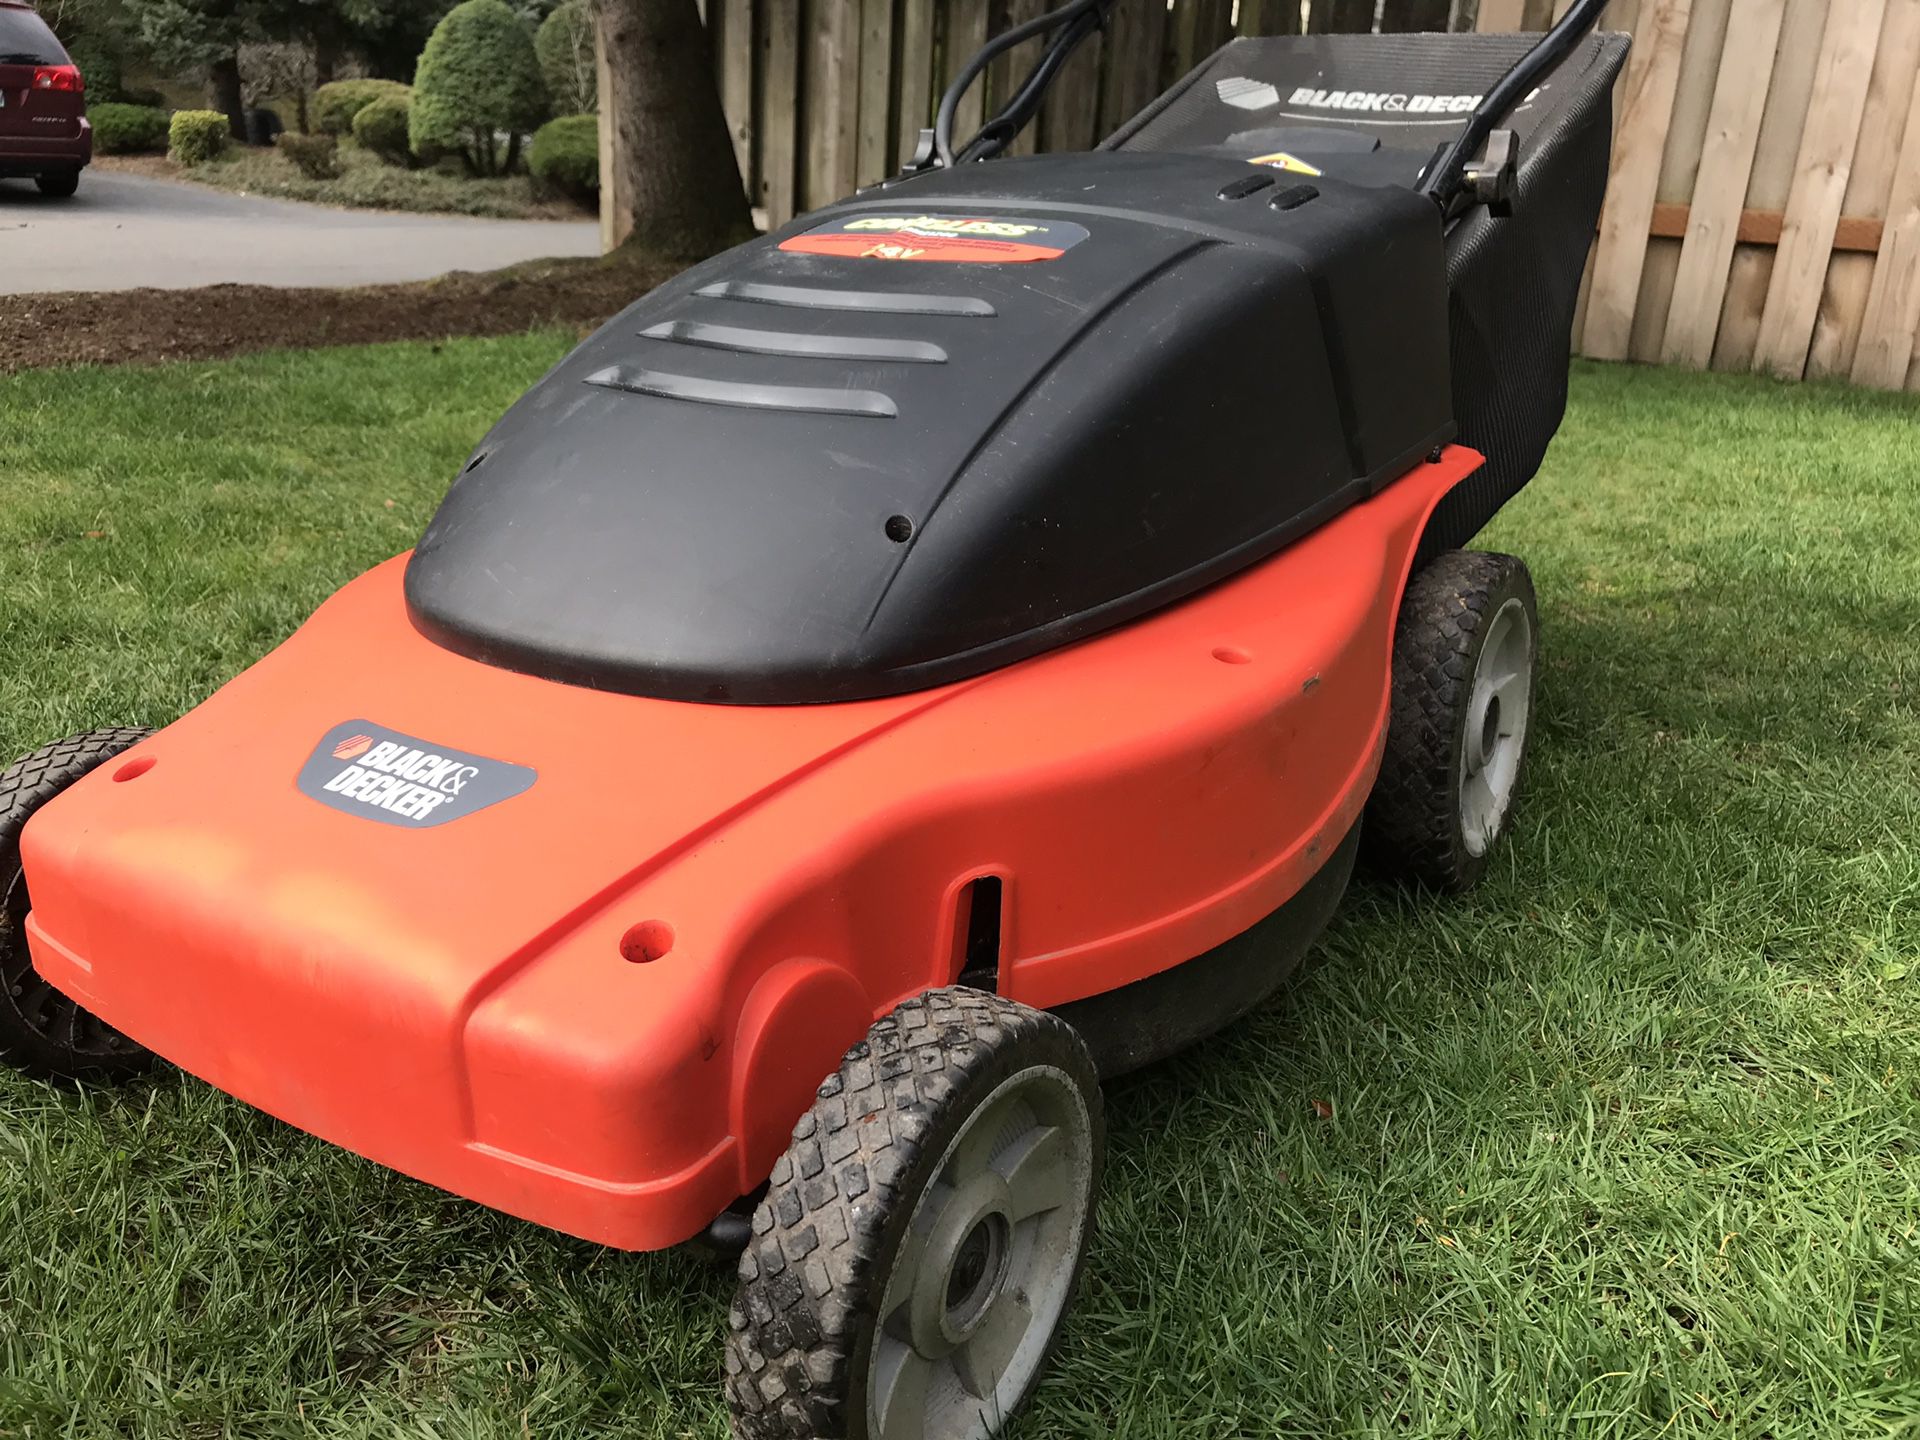 Black and Decker 24 Volt Cordless Electric Lawn Mower for Sale in